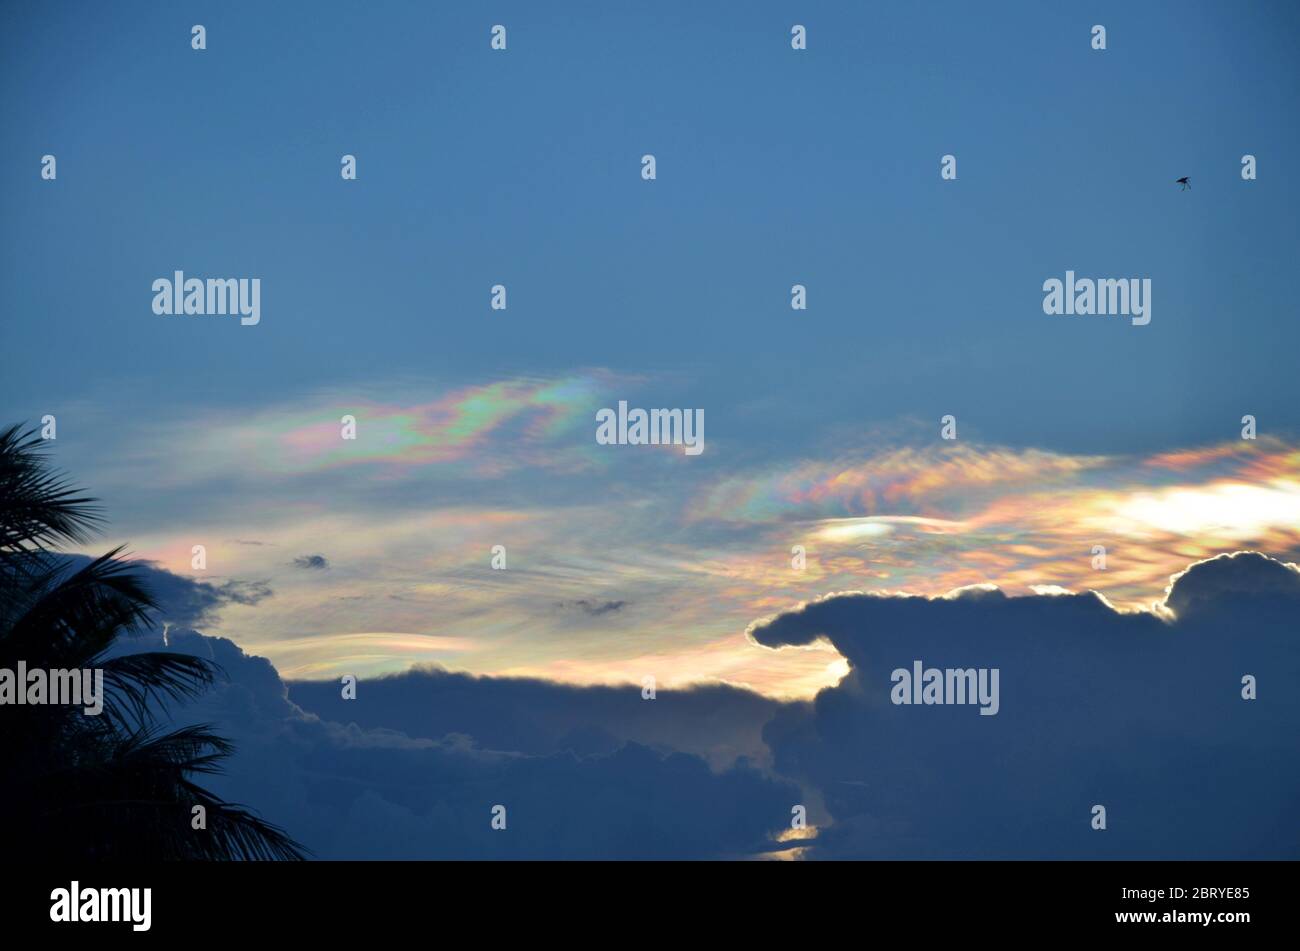 Rainbow-colored light effects around clouds in Monsoon season in South-East Asia Stock Photo